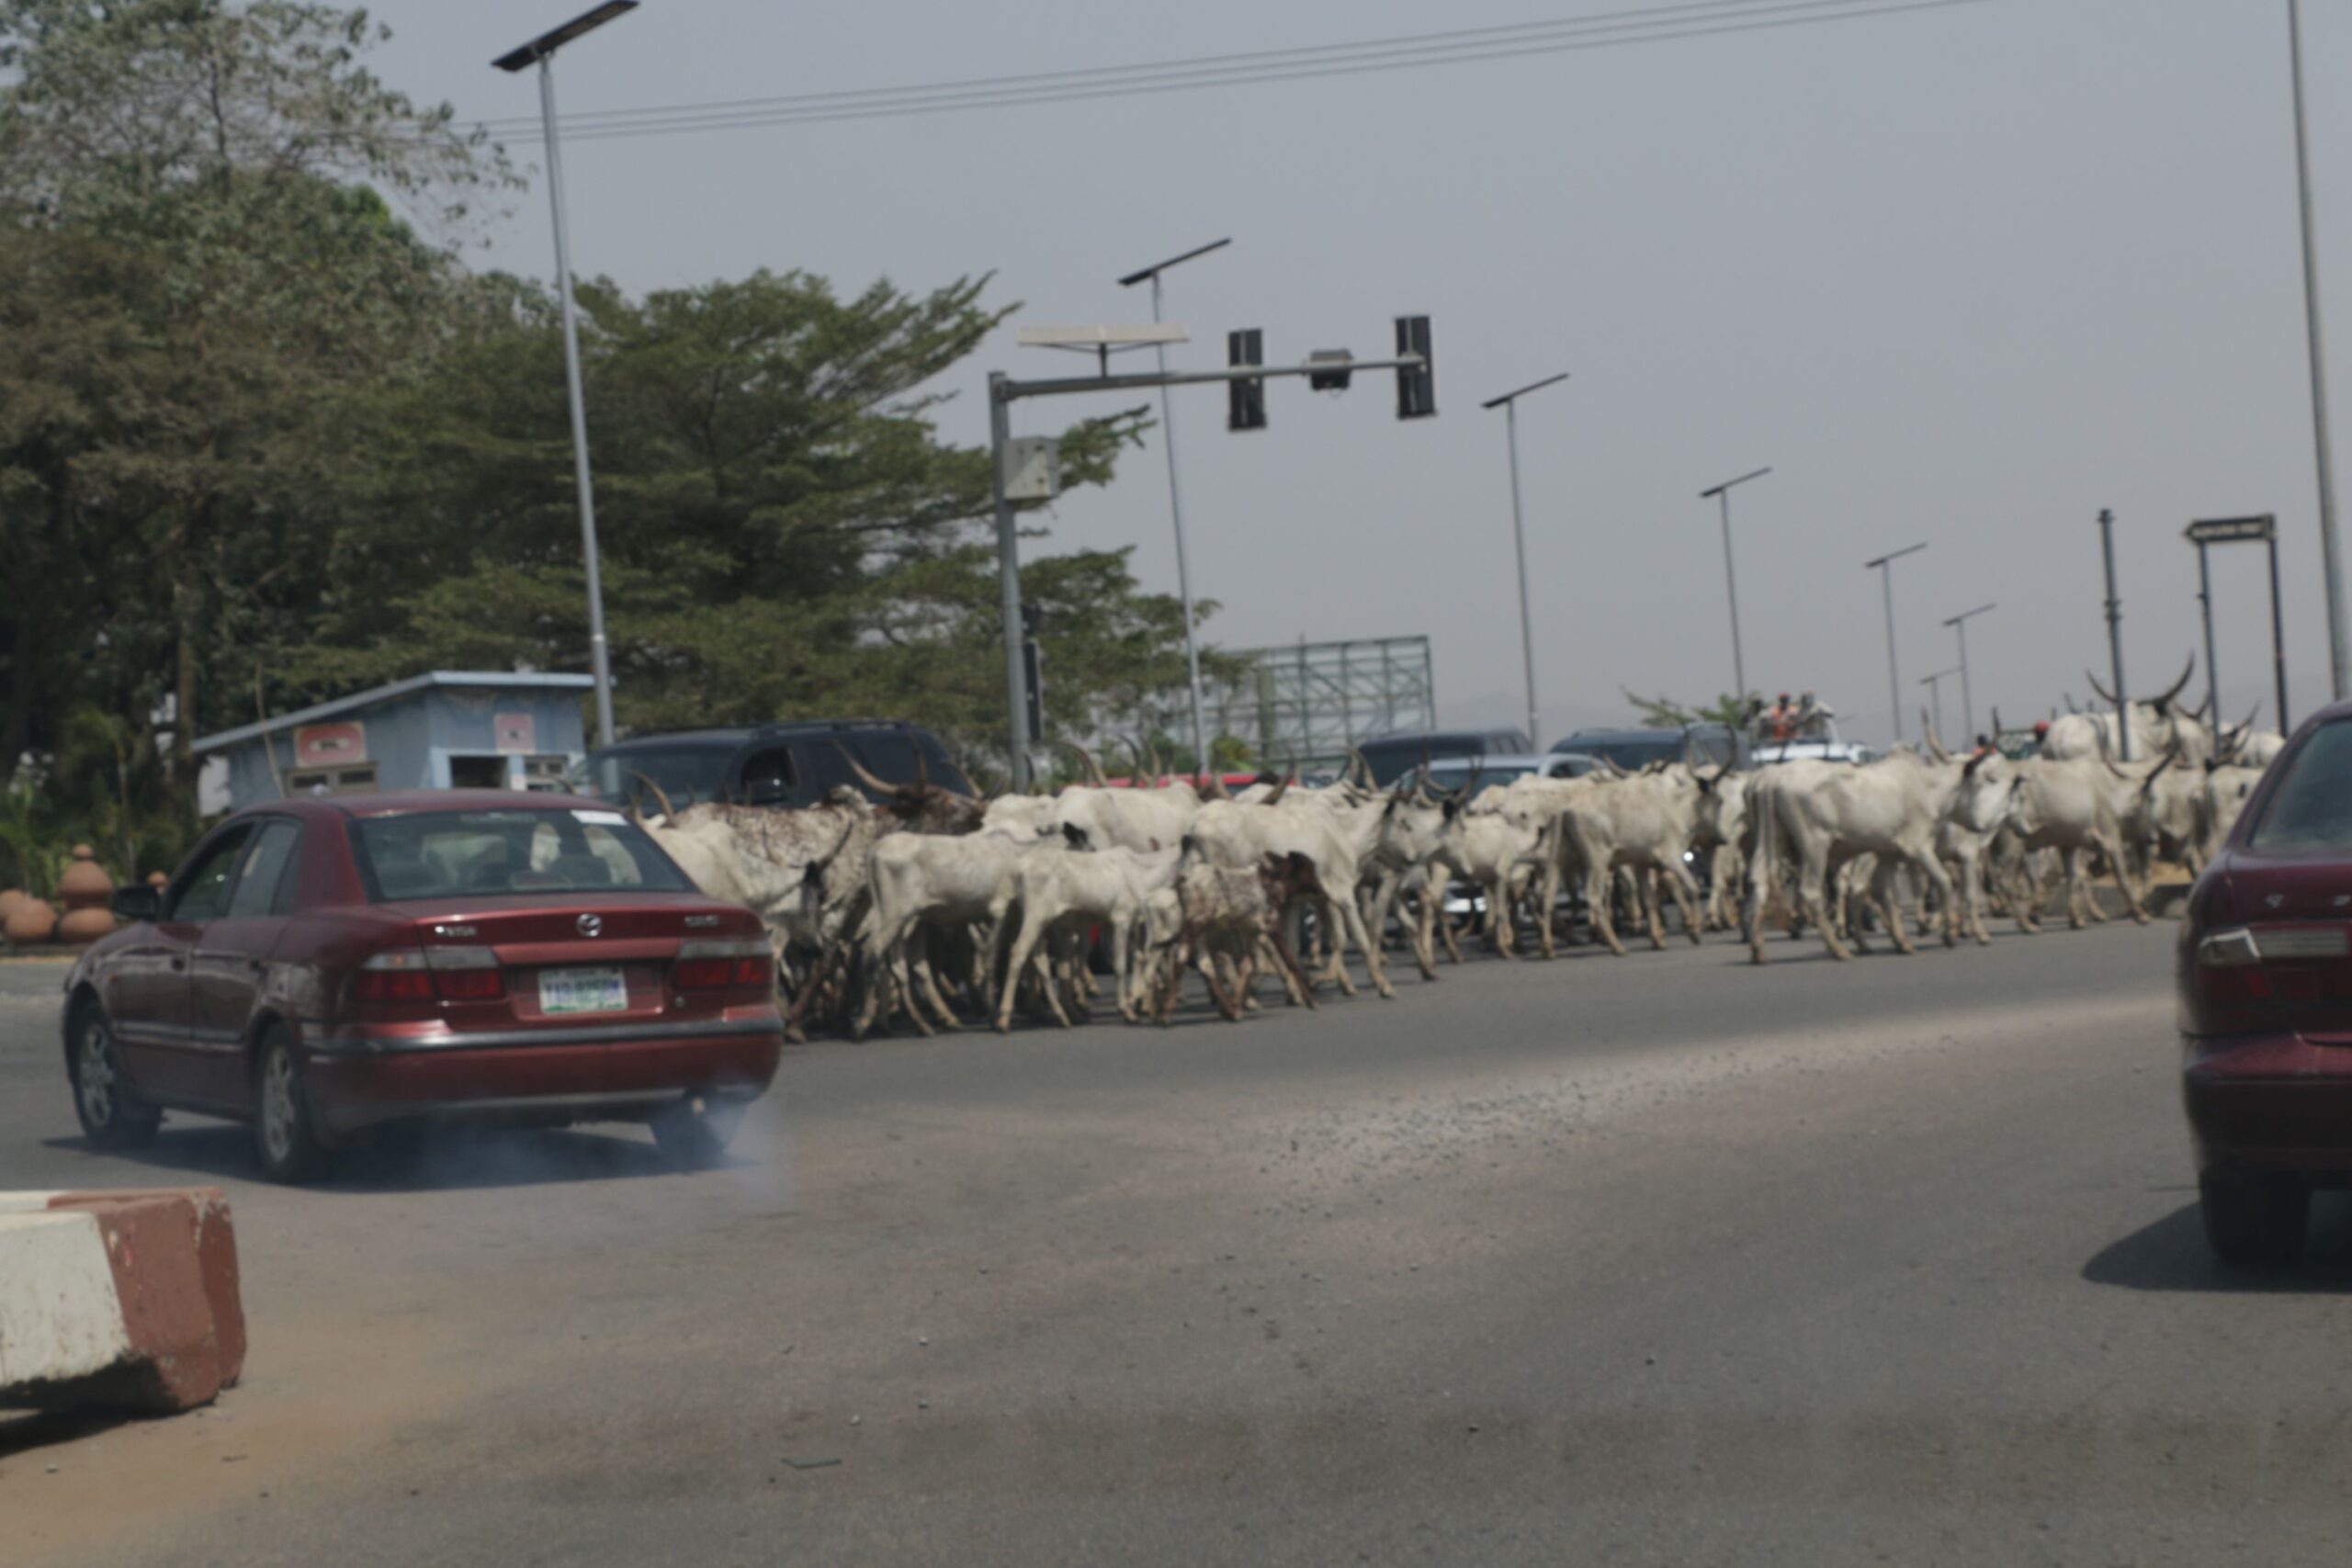 707A5DBC 450B 4BF8 BFF0 4CE341FC7DF7 scaled [PHOTOS] Federal Capital Cows: Cattle, motorists finding space on Abuja road